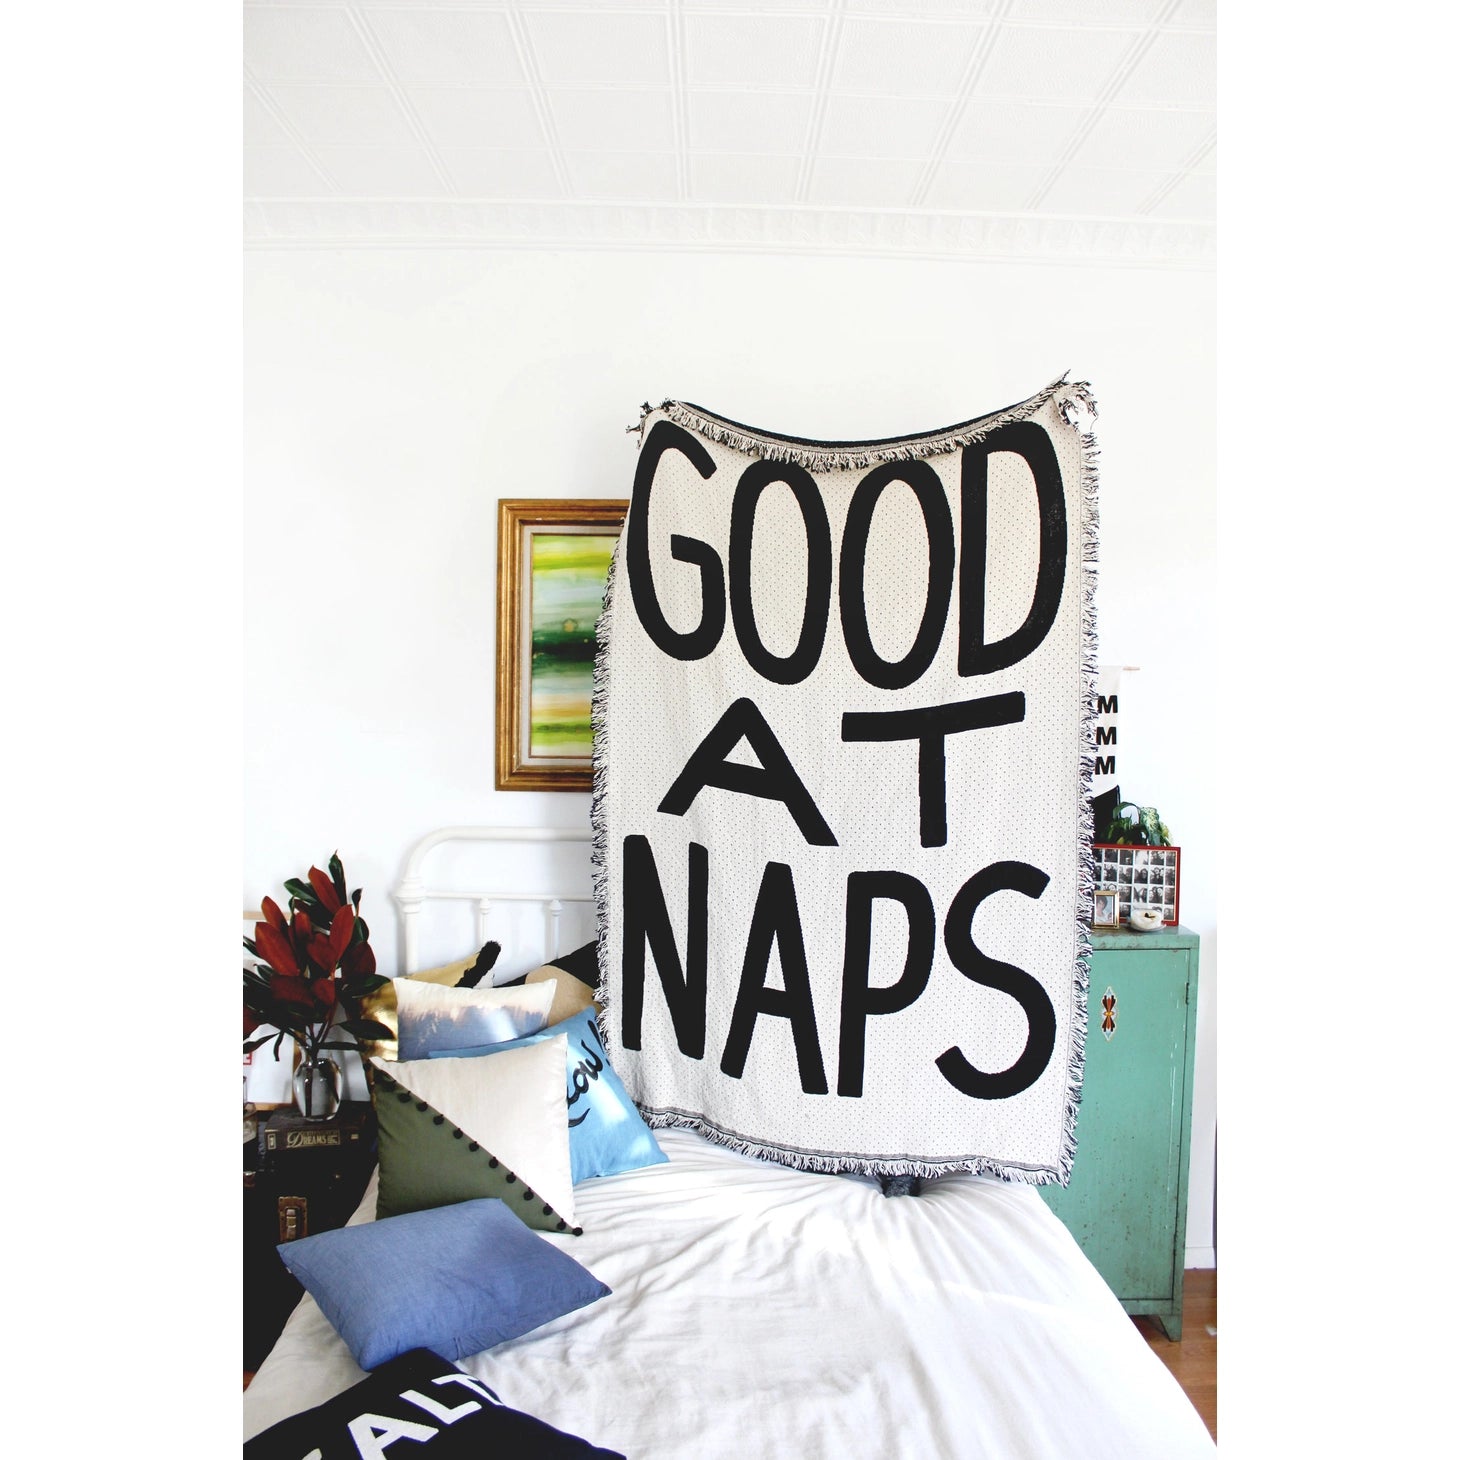 Good At Naps knit blanket with fringe in black and white for home decor and gifts for her.